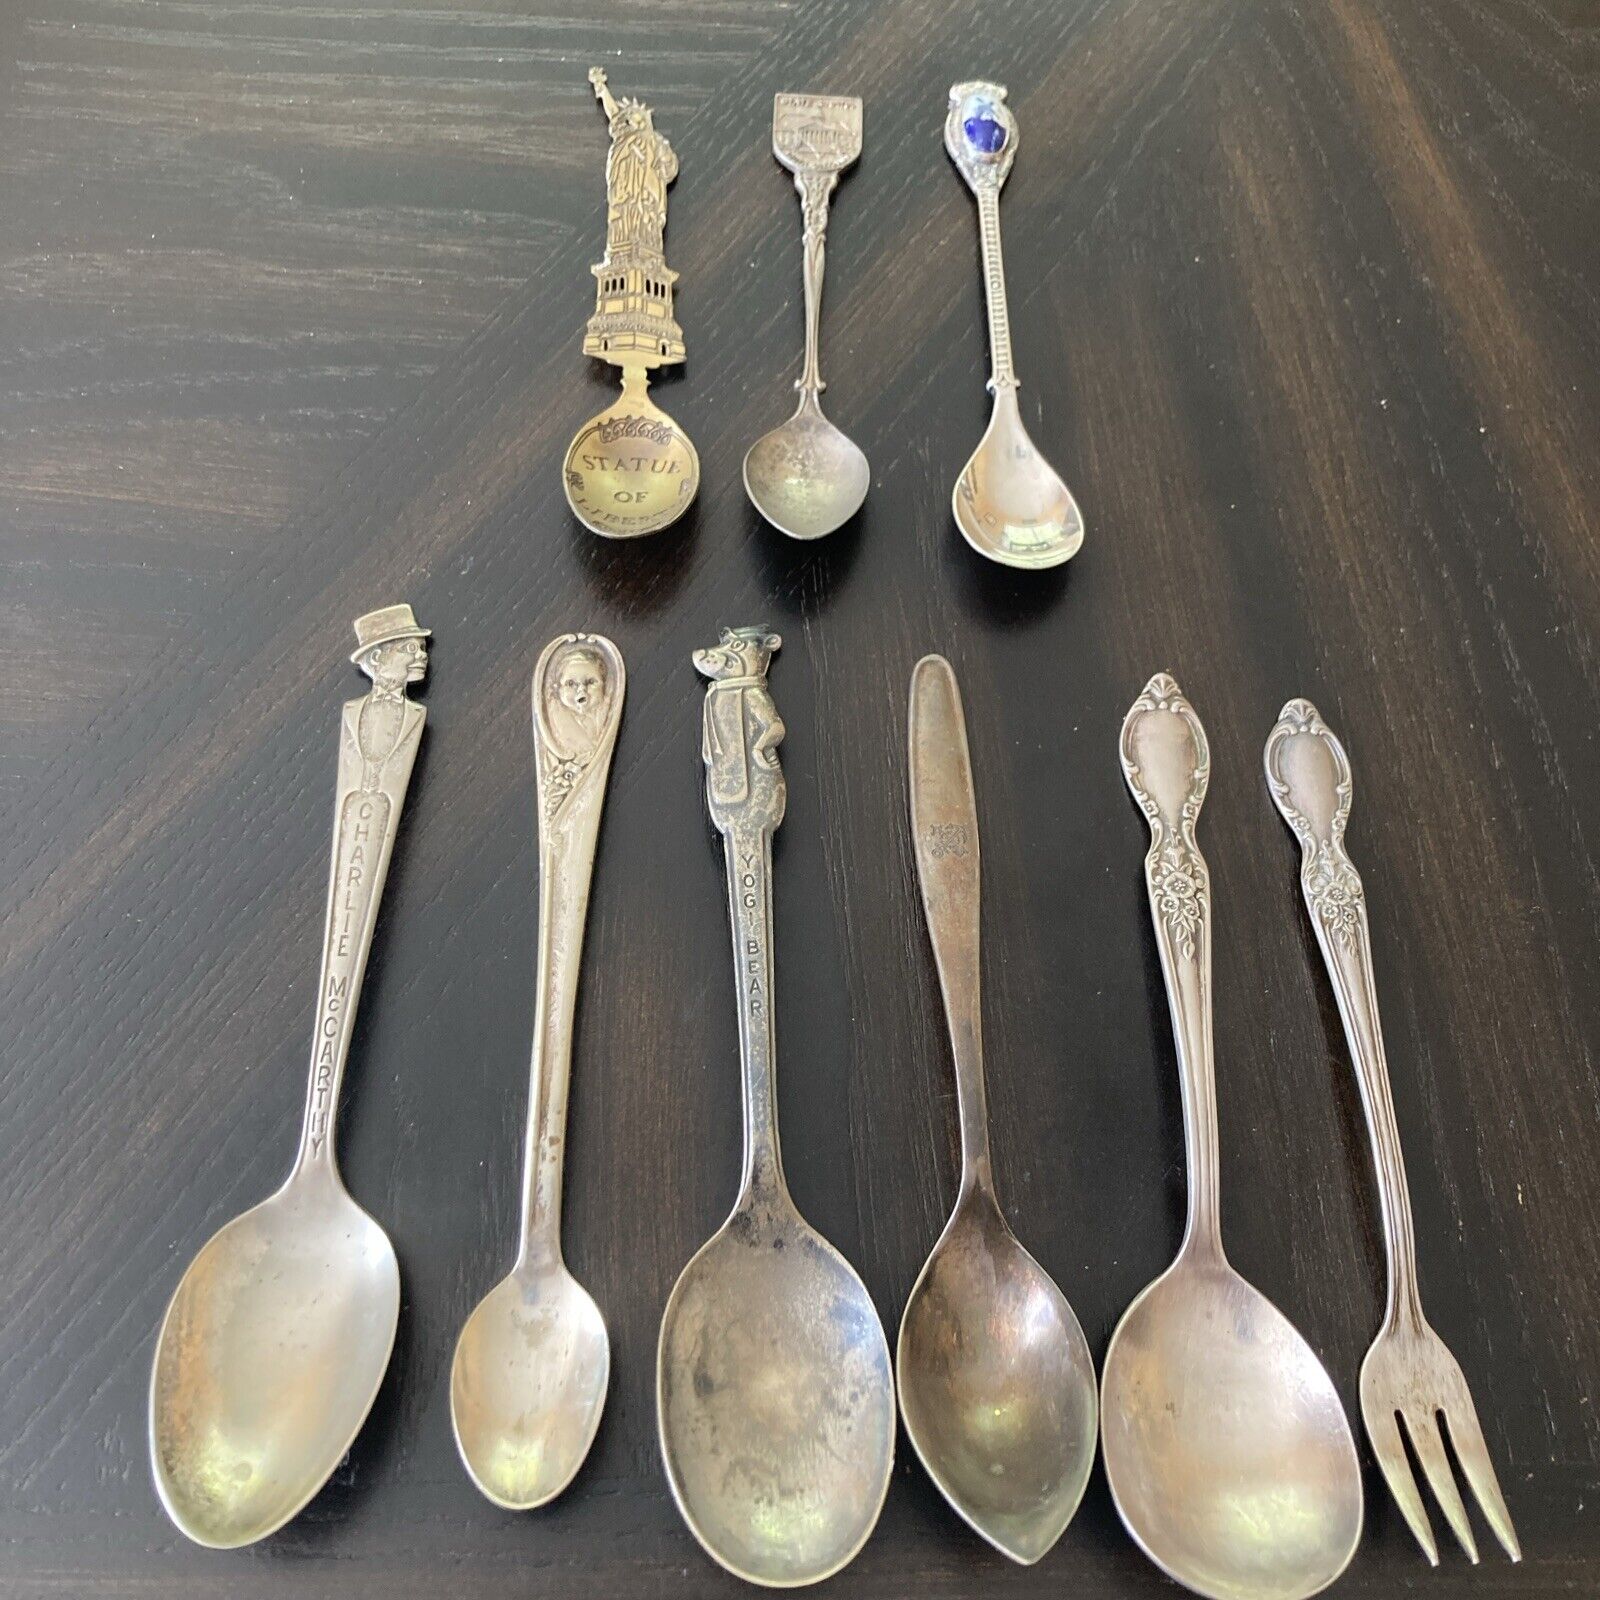 Vintage Collectible Spoon Lot Of 9 Old Spoons